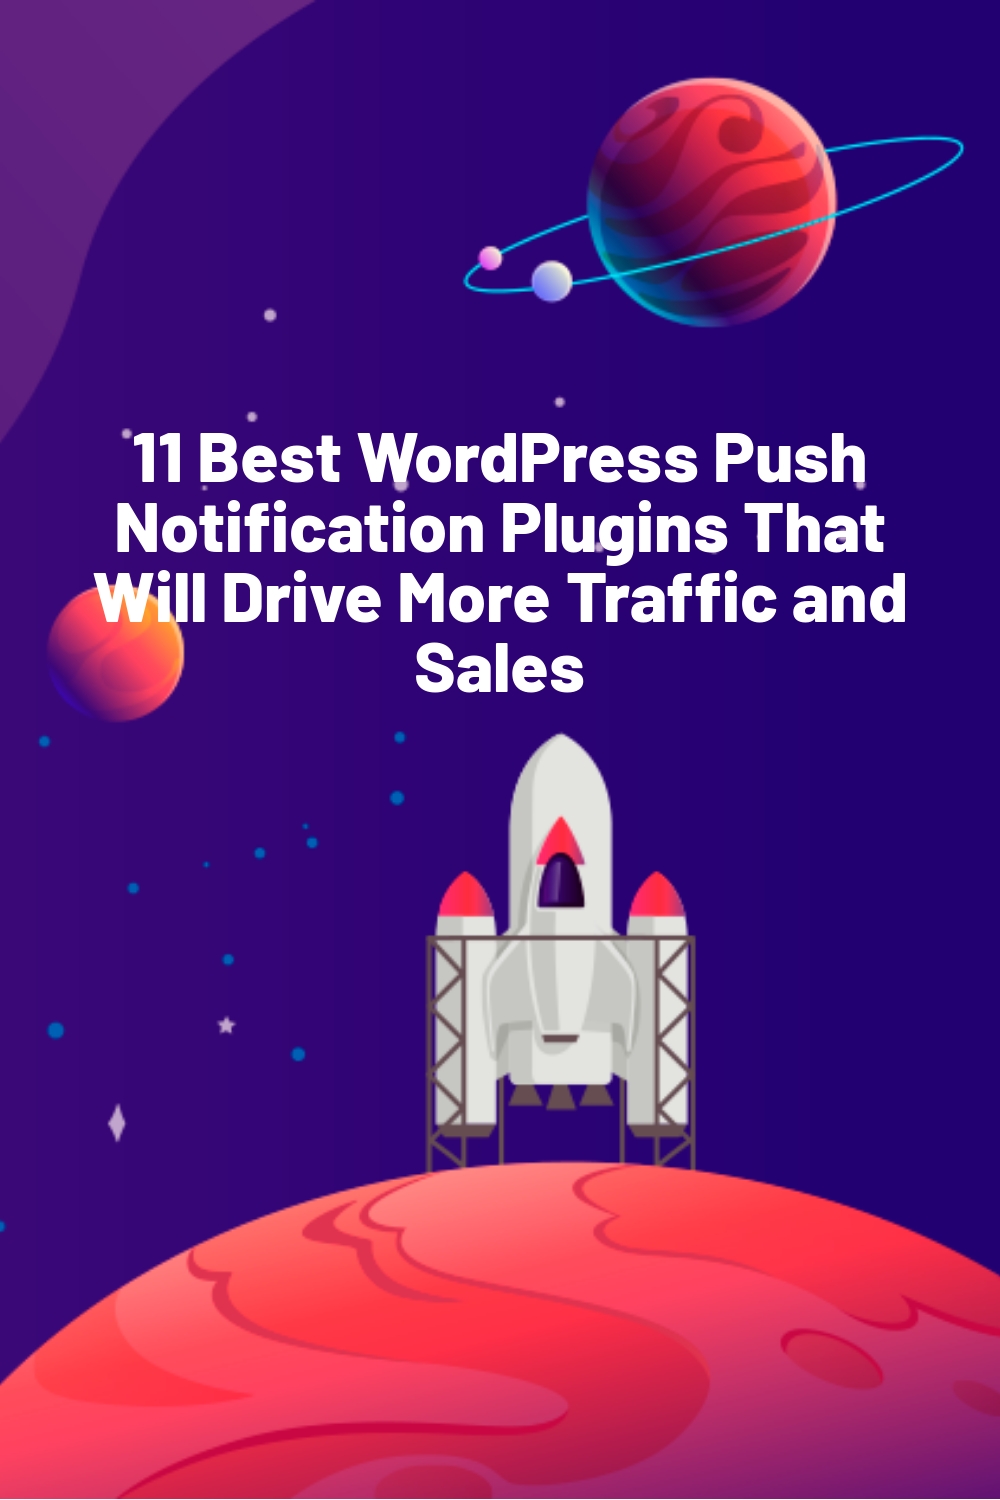 11 Best WordPress Push Notification Plugins That Will Drive More Traffic and Sales